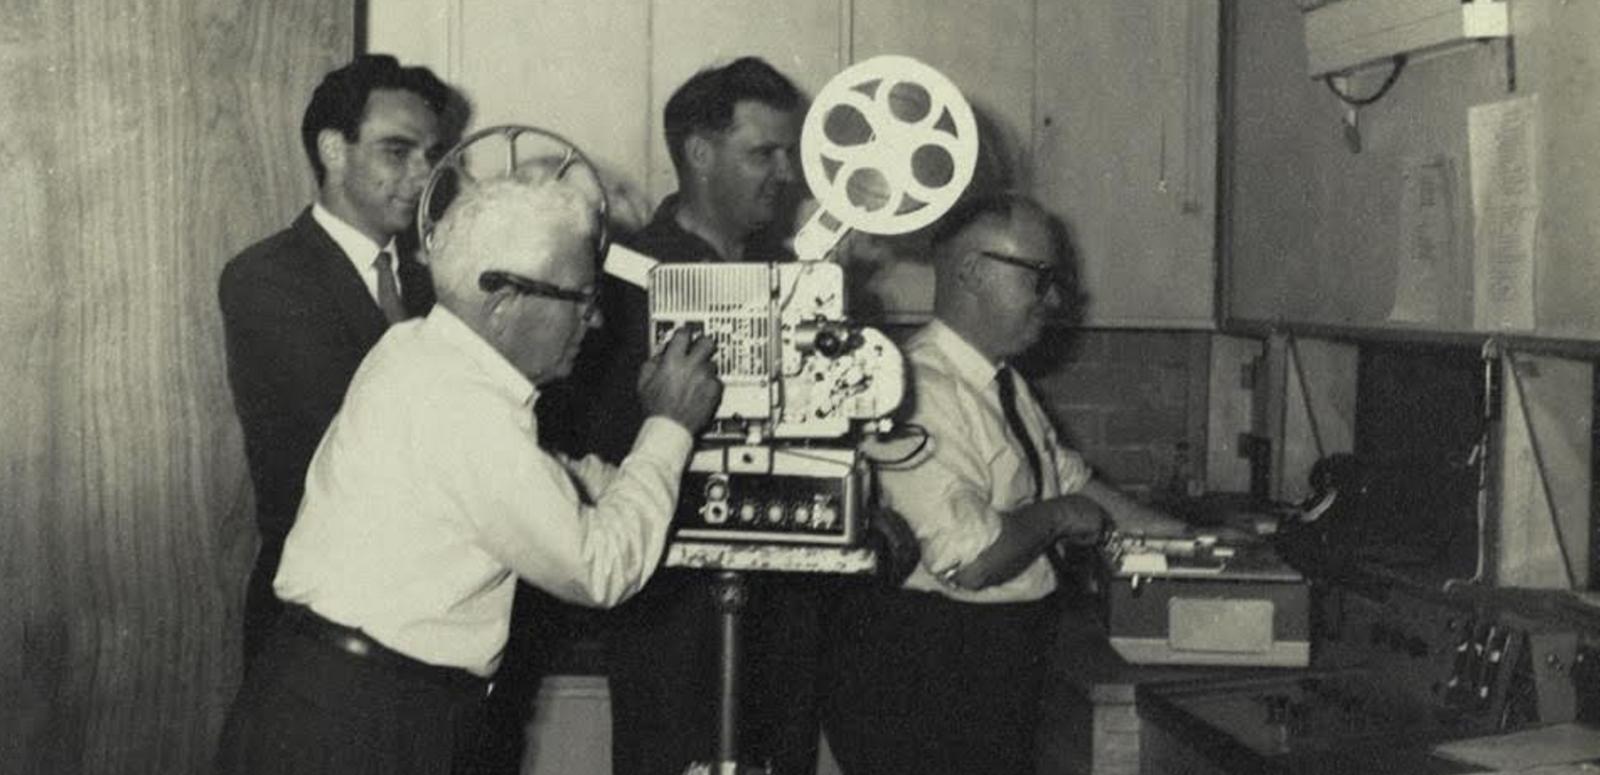 Four men operating a film projector